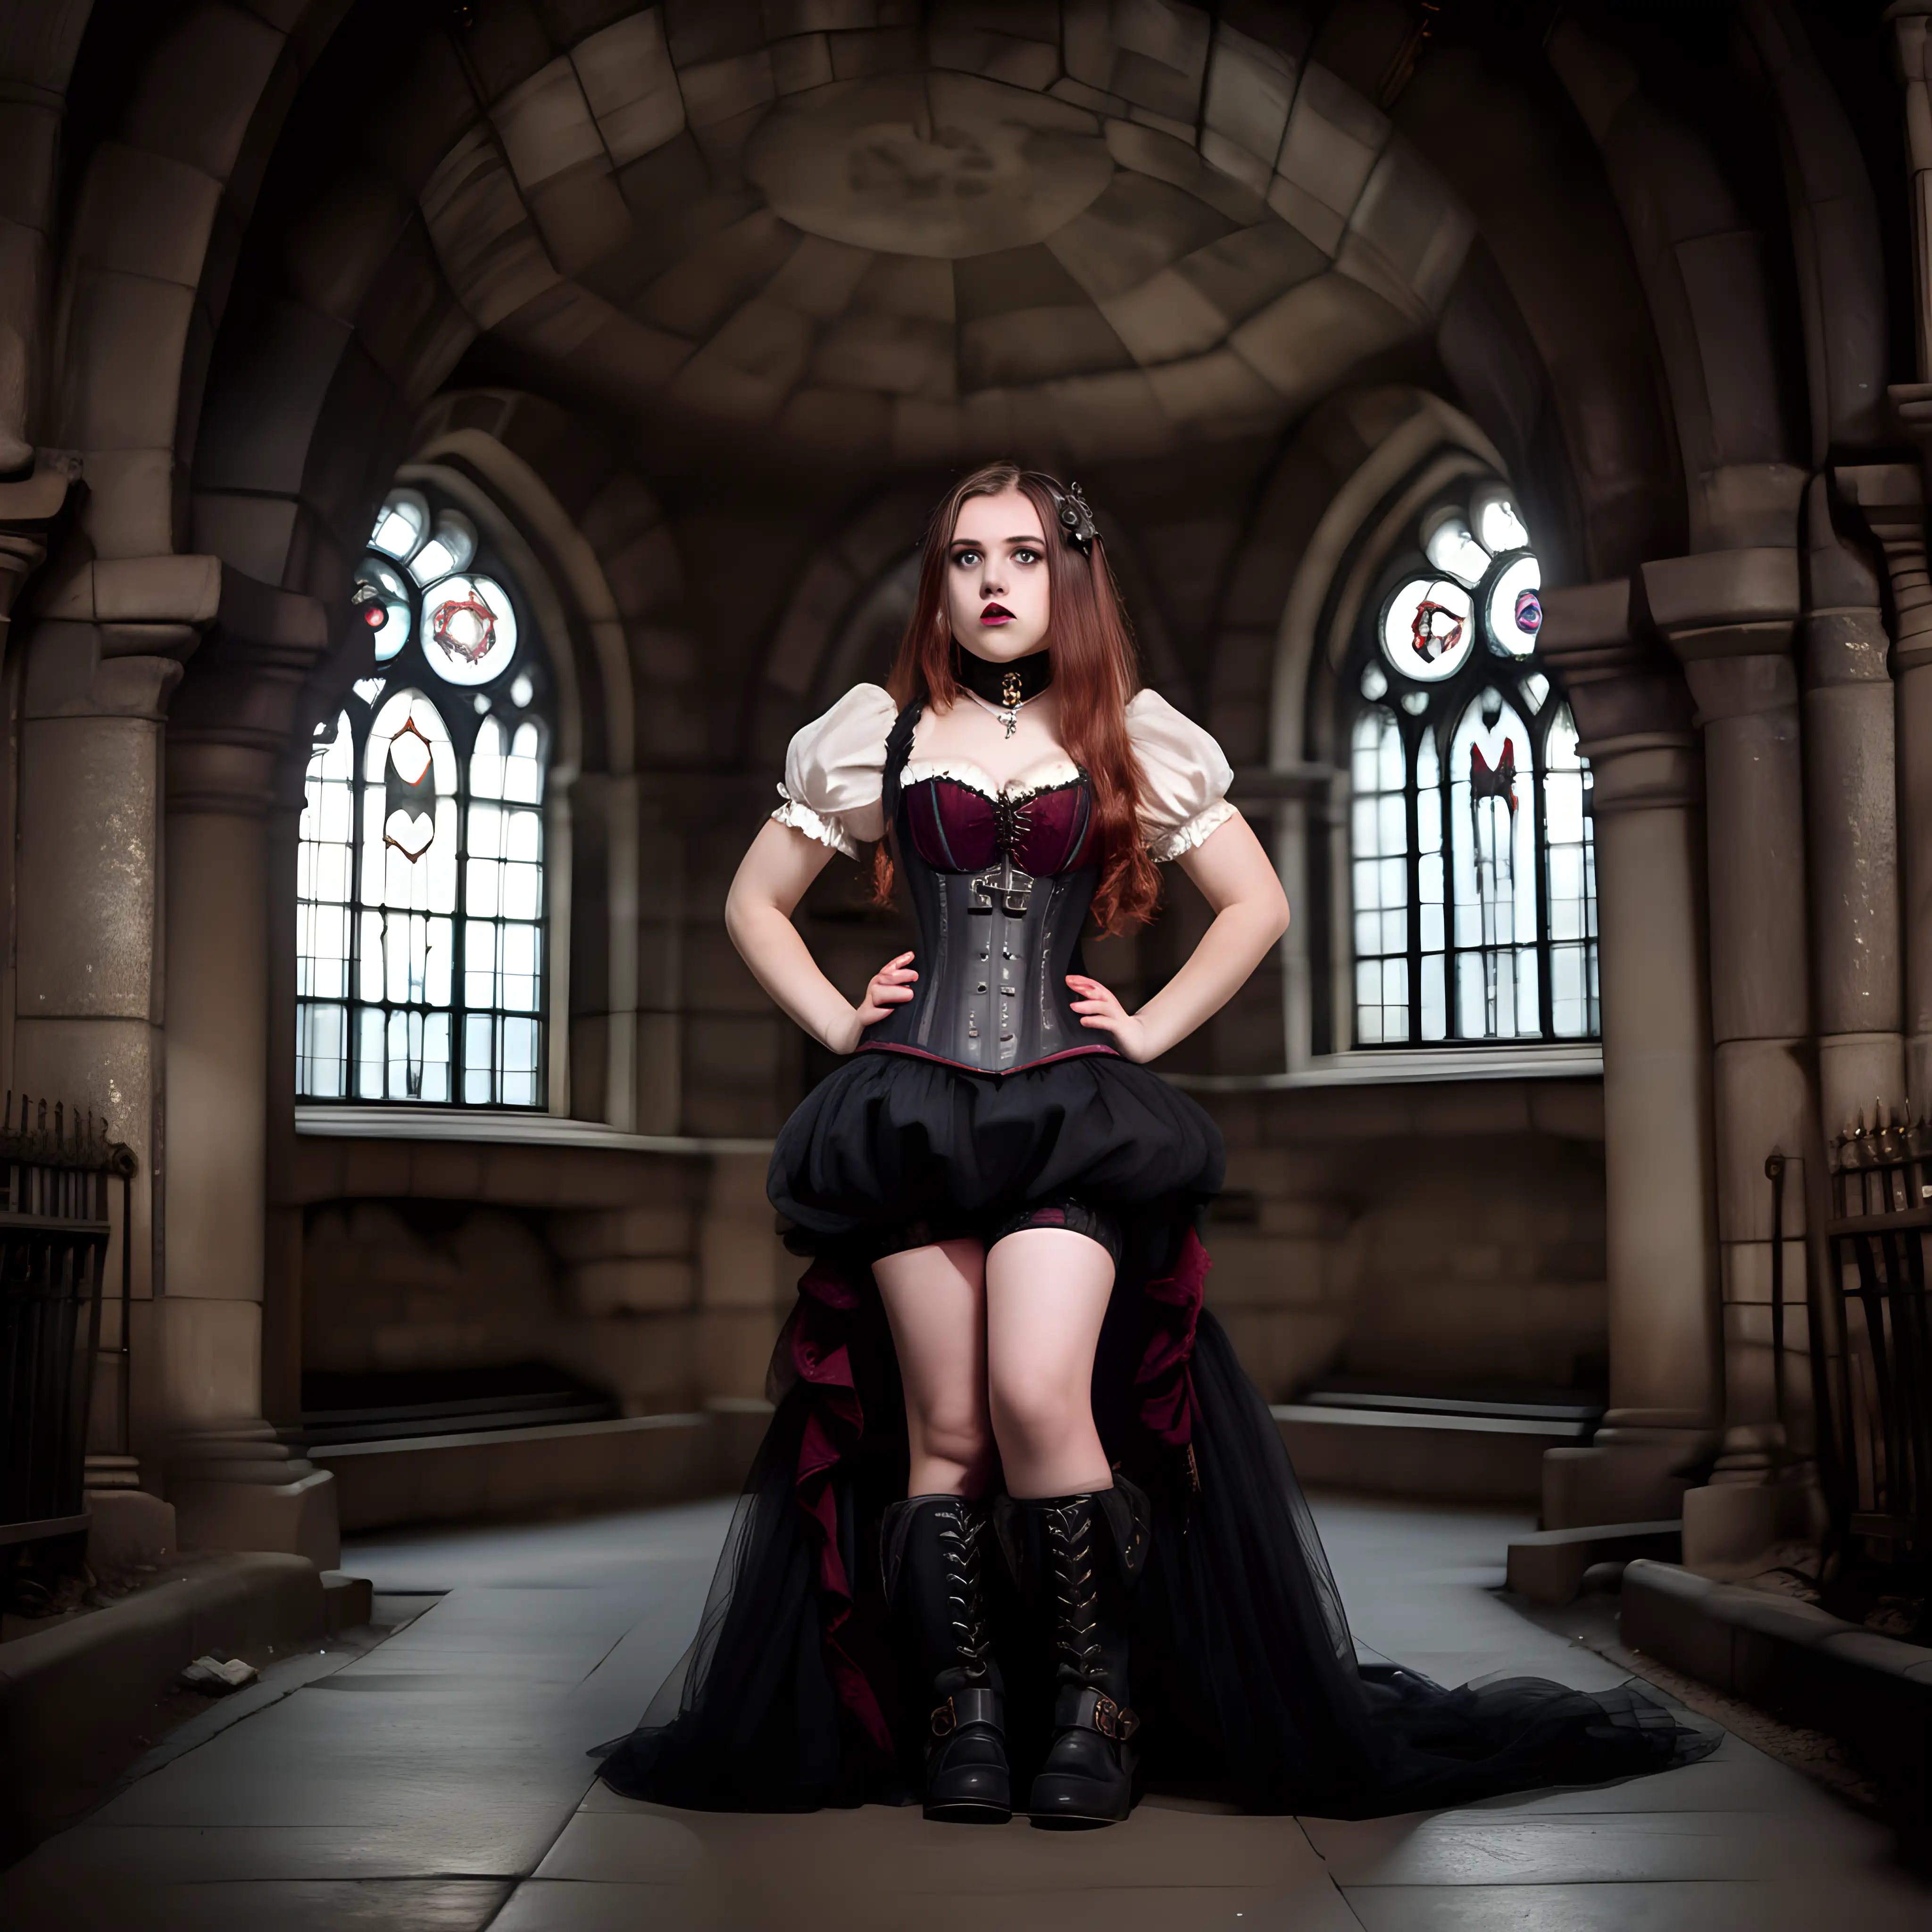 Steampunk Vampire in Victorian Crypt Enigmatic 18YearOld Woman Wearing  Corset and Boots